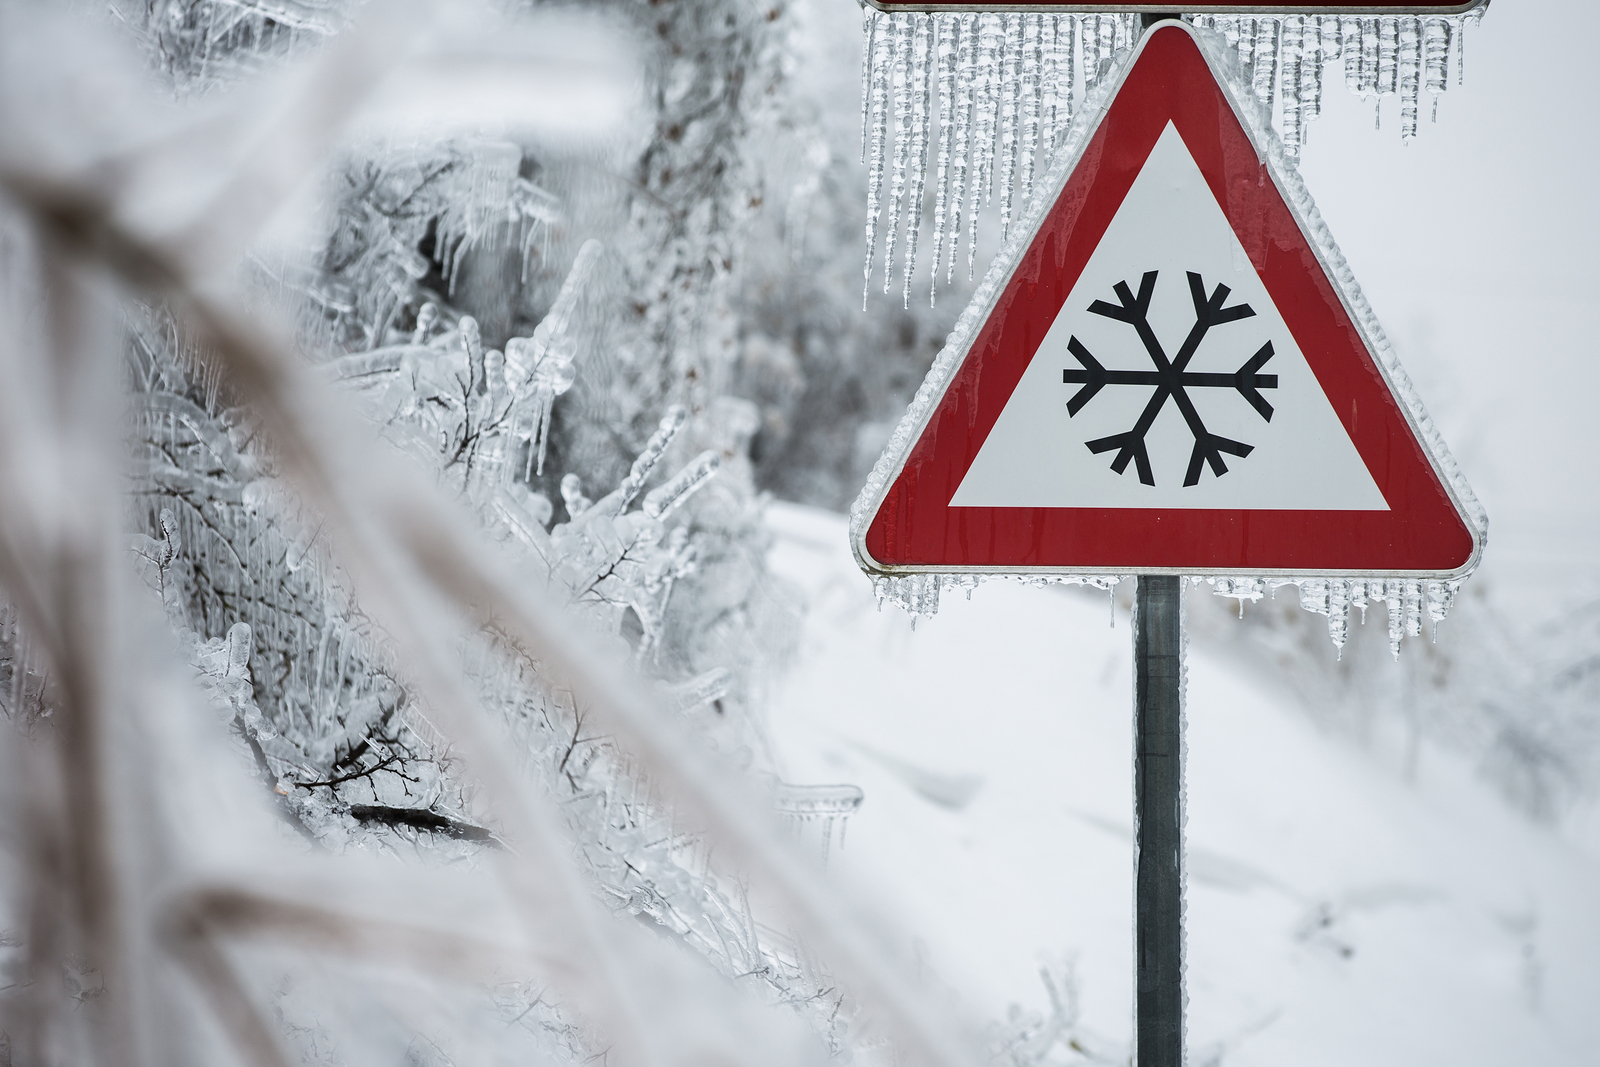 Slip And Fall Accidents To Look Out For In Bad Weather